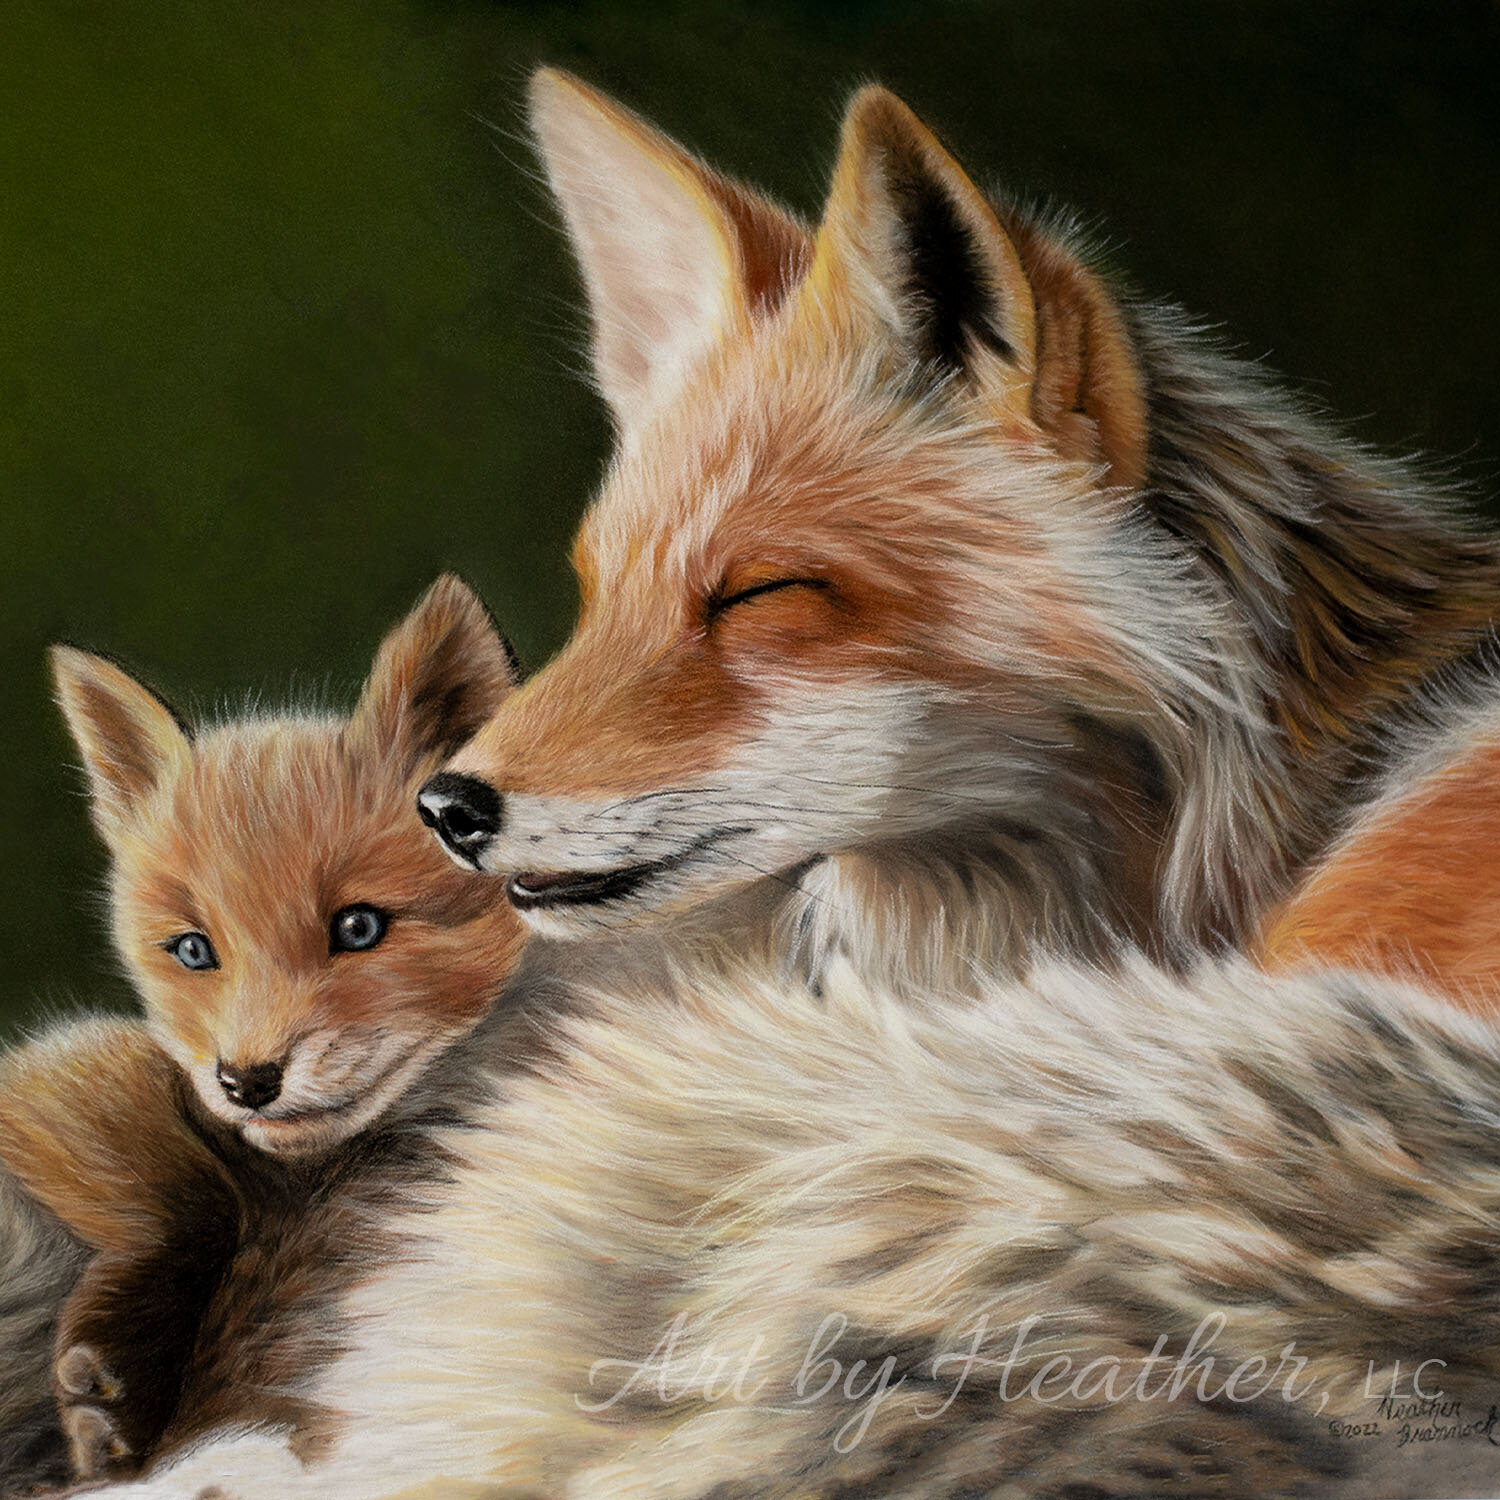 Pastel drawing of mother fox with baby relaxing together in the sun.